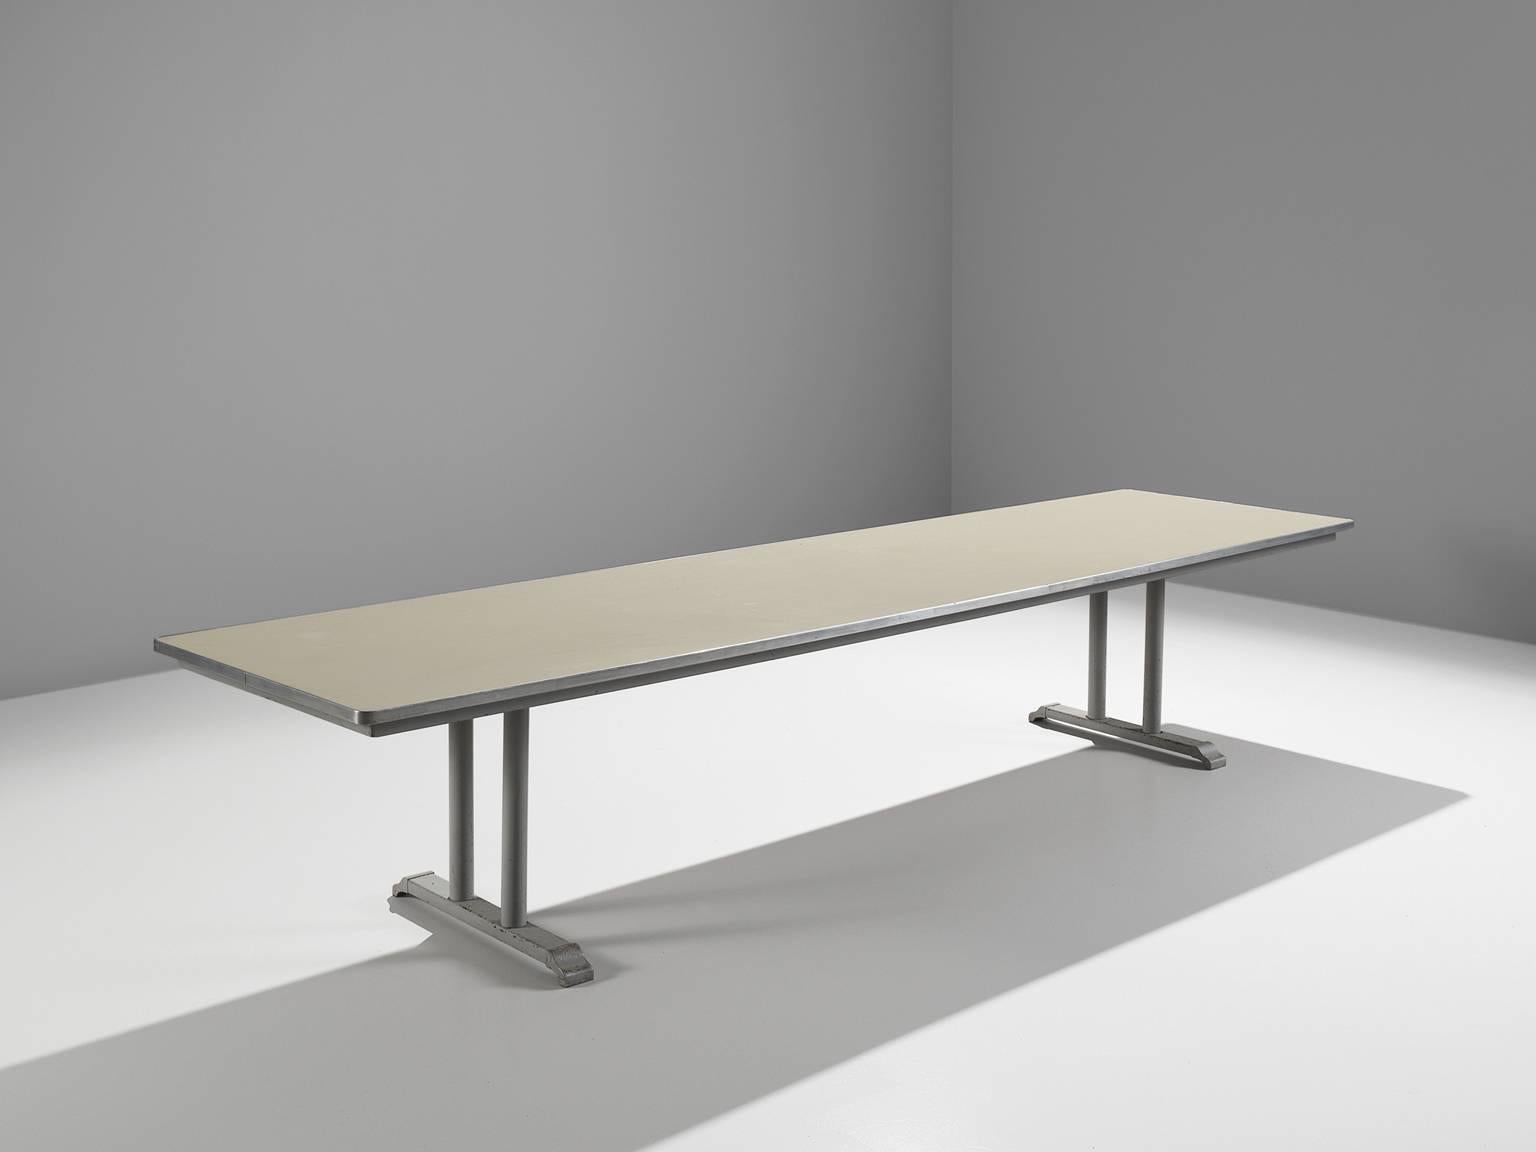 Conference table, linoleum top with aluminium foot, Chris Hoffmann for Gispen, The Netherlands, 1949. 

This four meter long conference table is produced by Gispen (1916-) and designed by Chris Hoffmann. The table features two trestle bases legs.